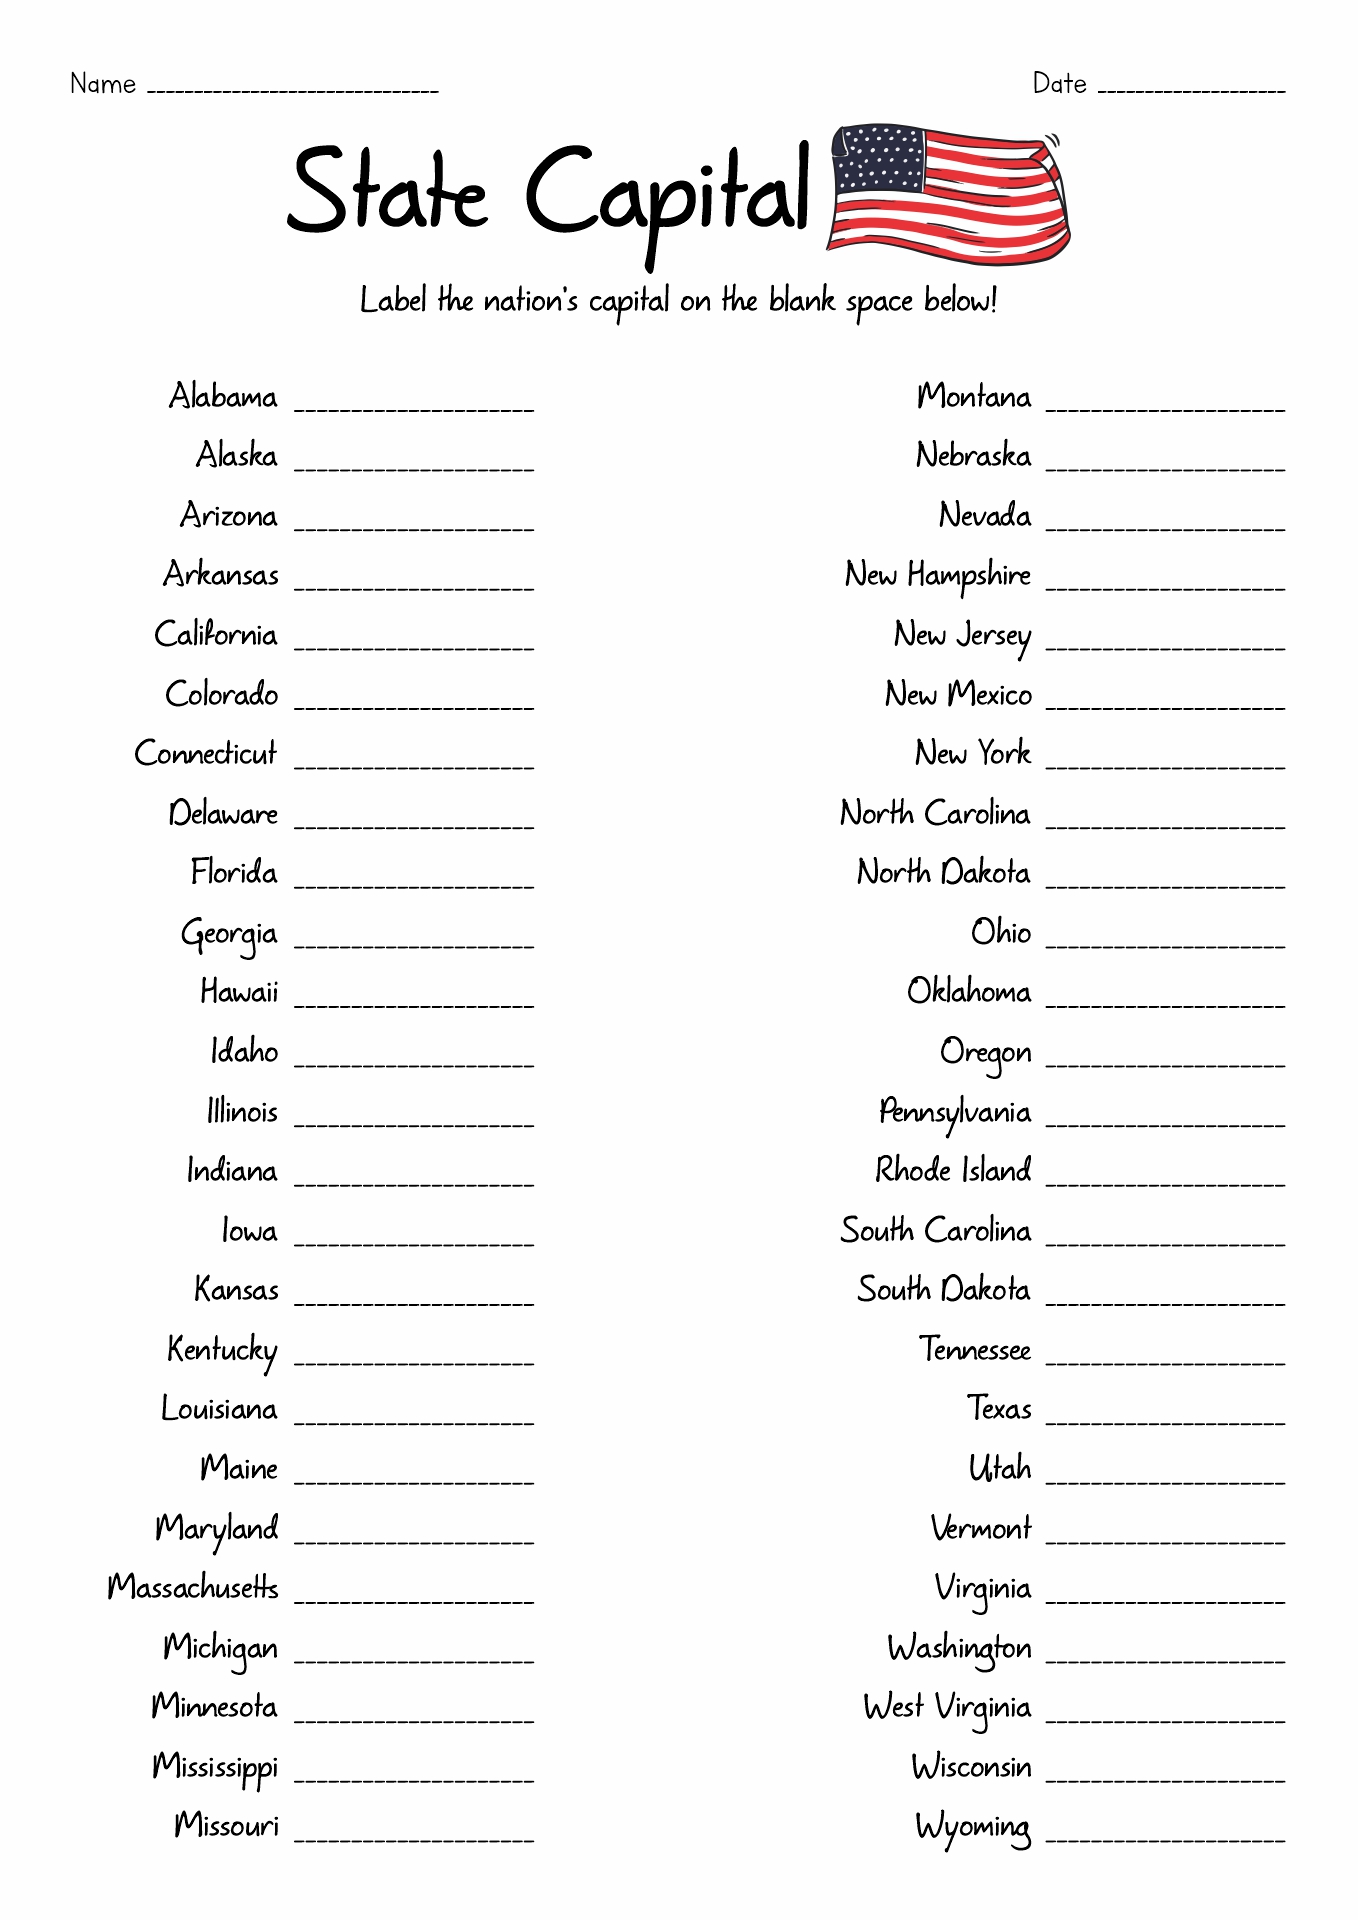 state-capitals-printable-list